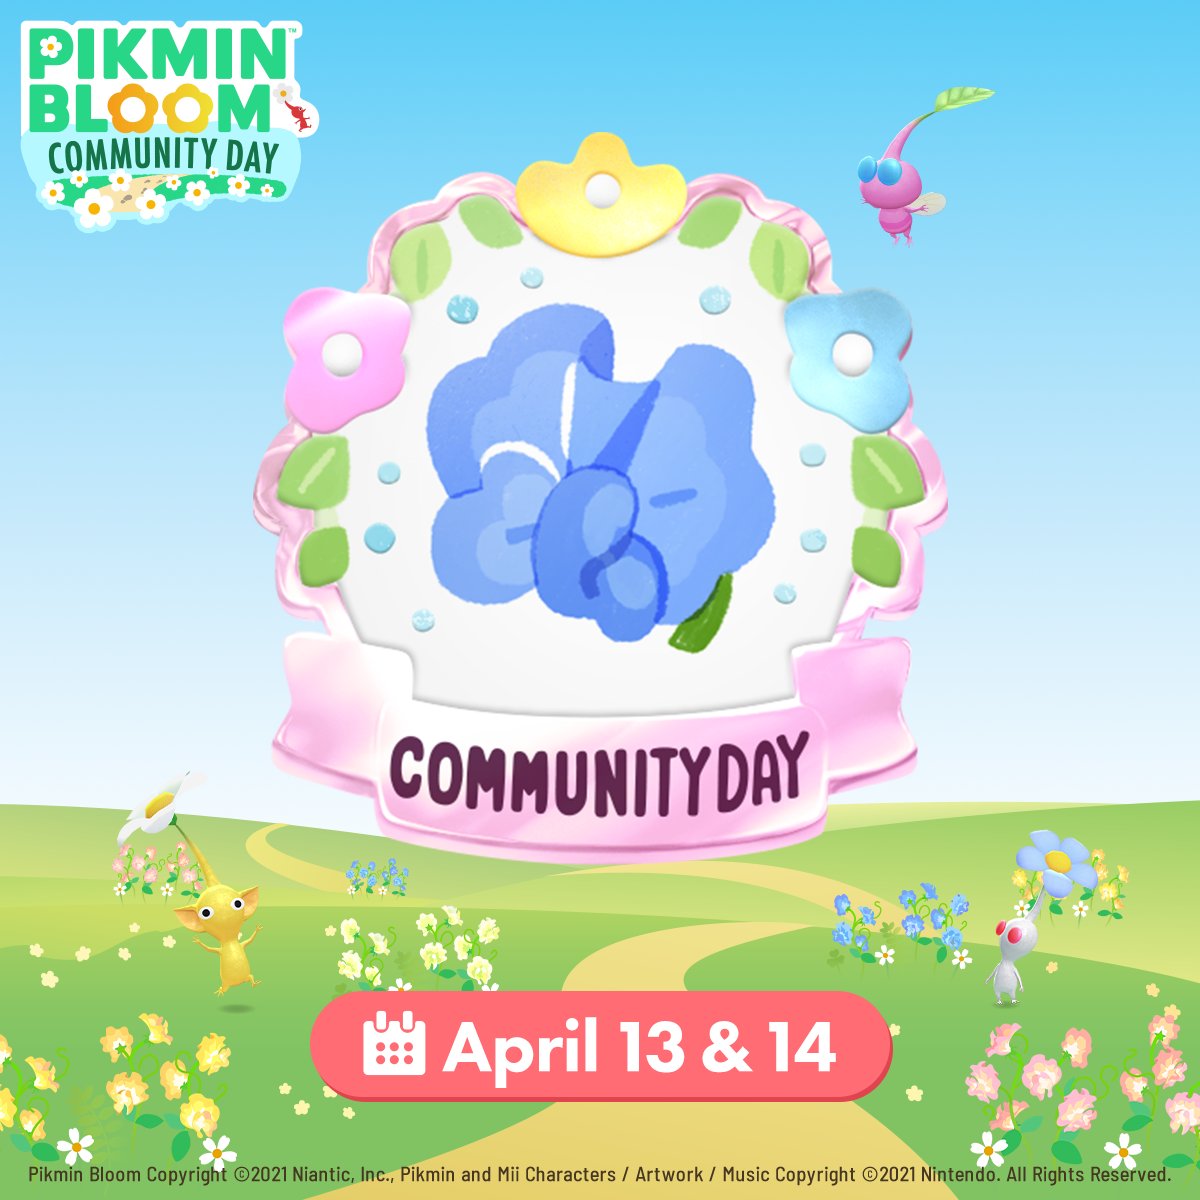 #CommunityDay will be held on April 13th and 14th 💐✨ Your next #10KWalkWithPikmin is a great opportunity to look for seasonal treasures while venturing outside, as the weather is a bit milder this time of the year in many regions around the world 🌸 pikminbloom.com/news/april24-c…